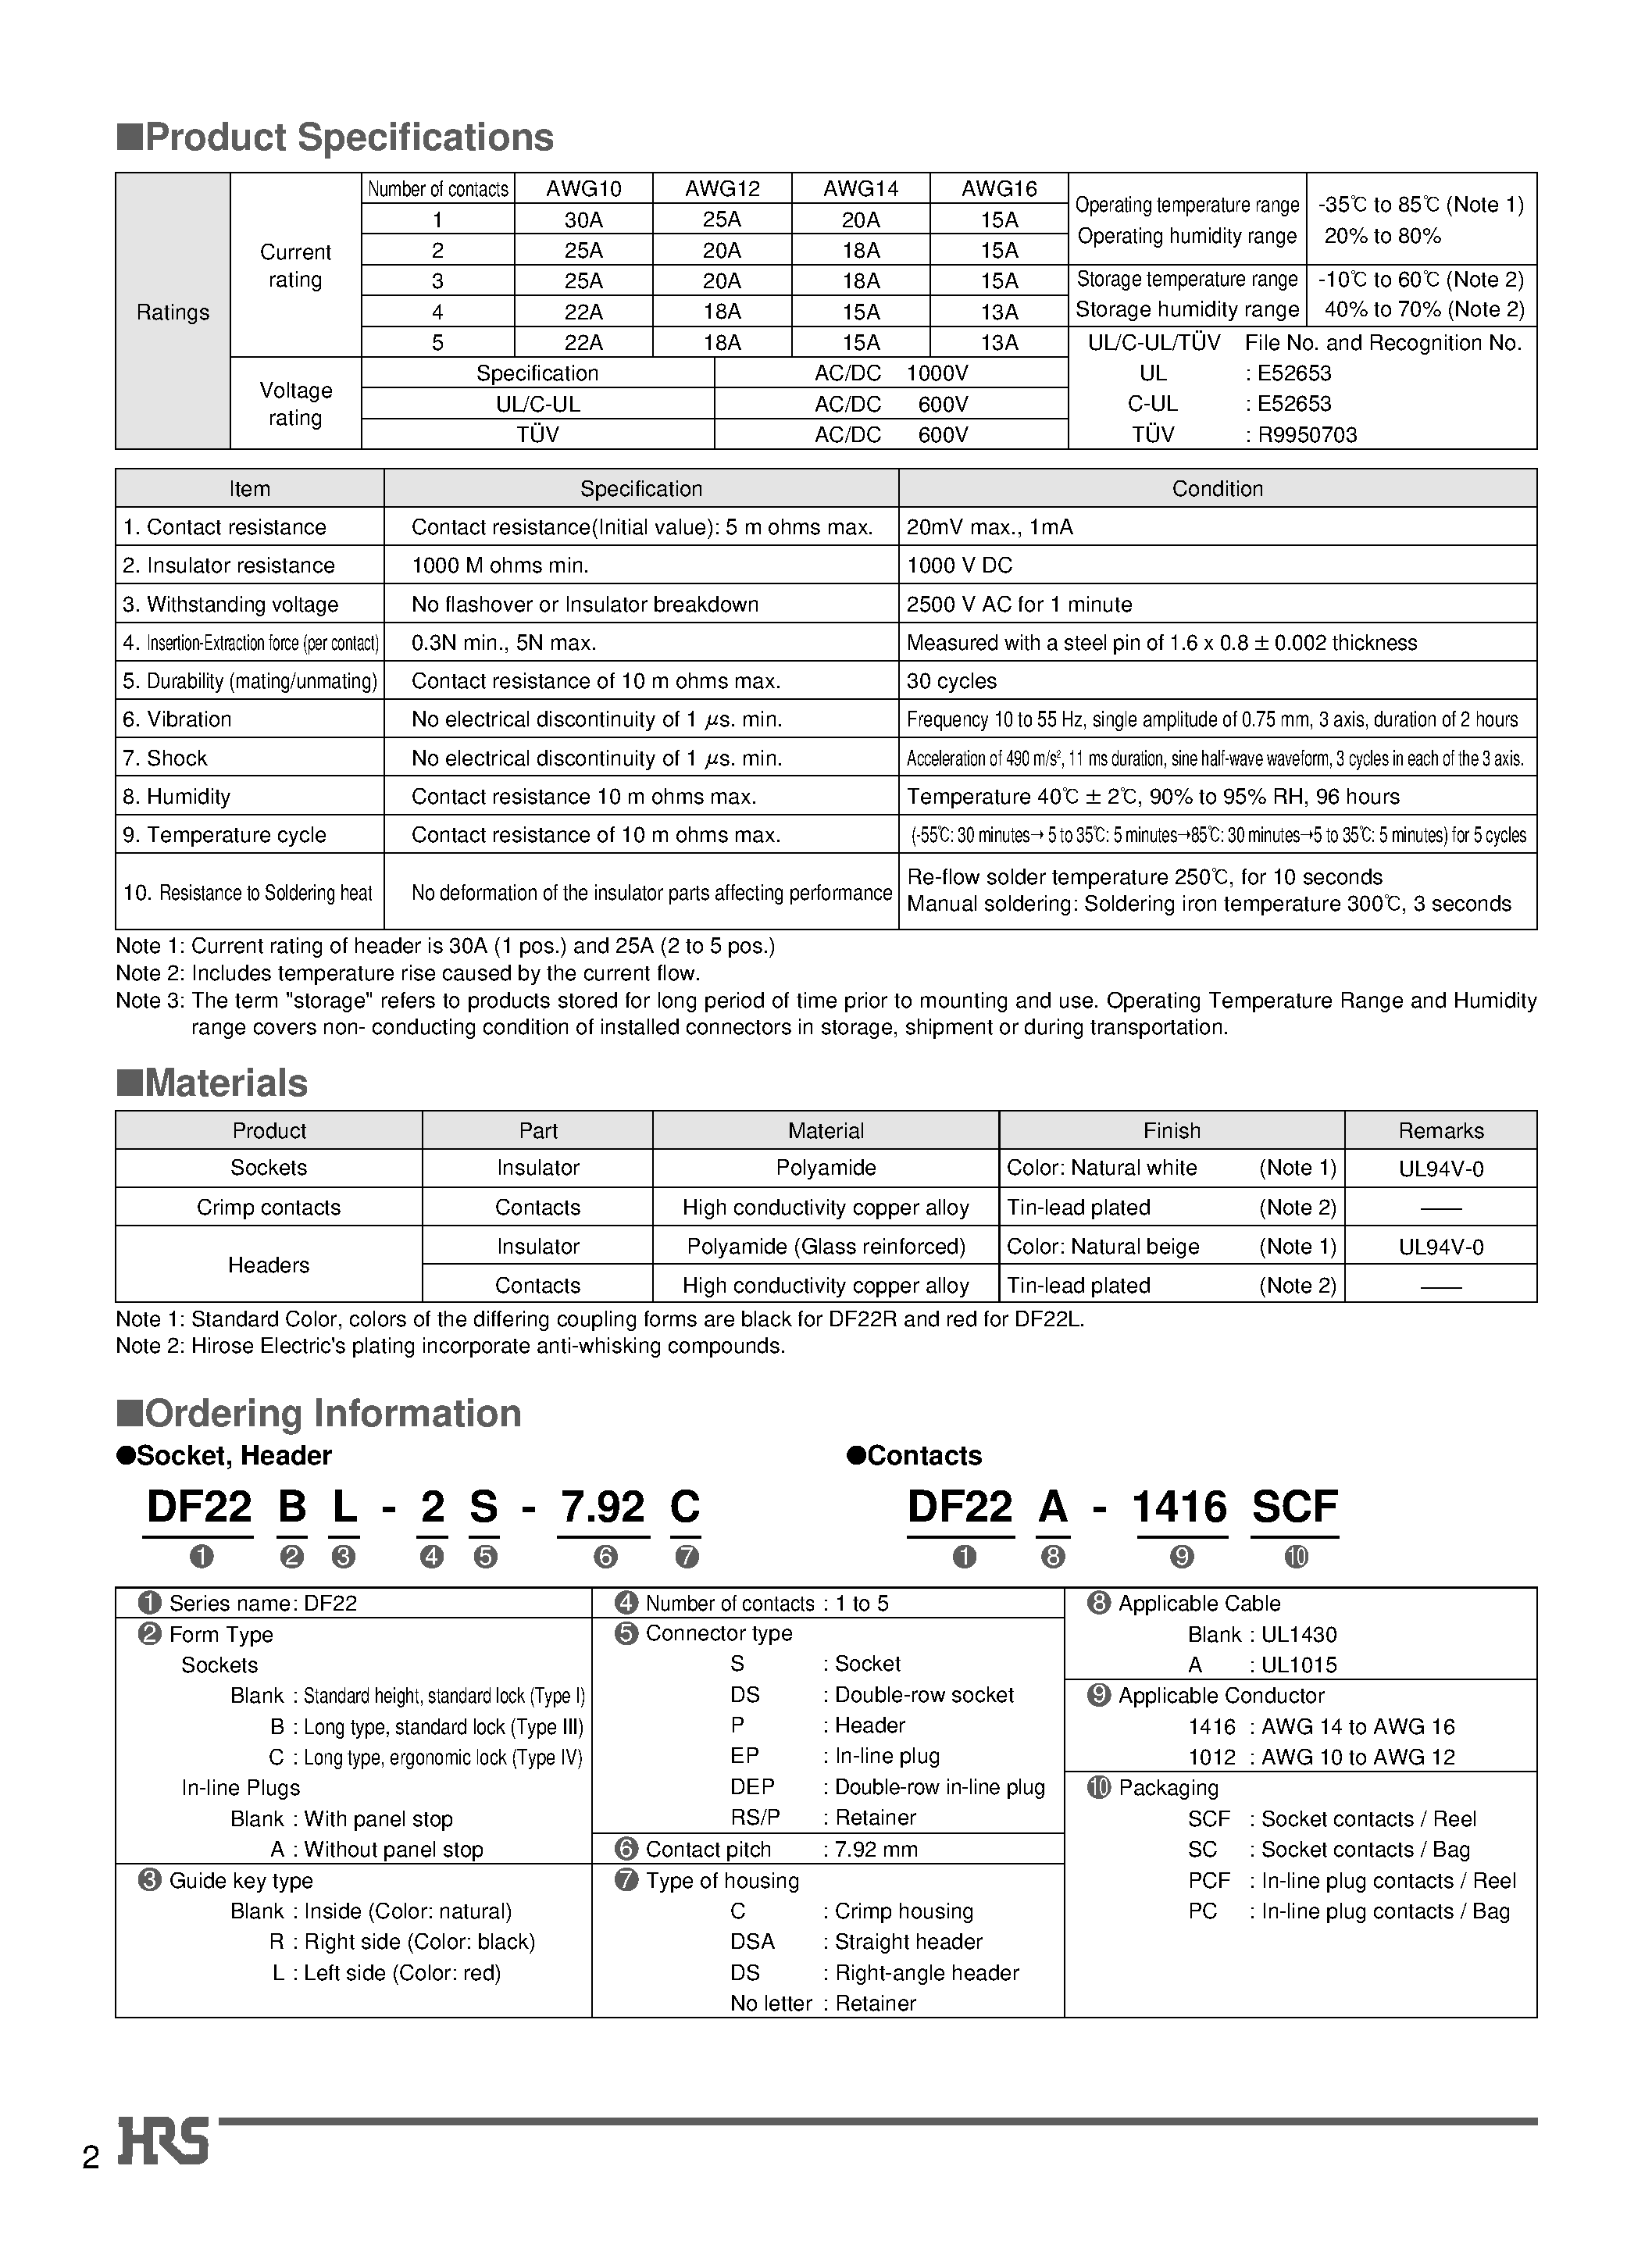 Datasheet DF22A-5EP-7.92C - 7.92 mm Contact Pitch/ High-Current Connectors for Internal Power Supplies (UL/ C-UL and TUV Listed) page 2